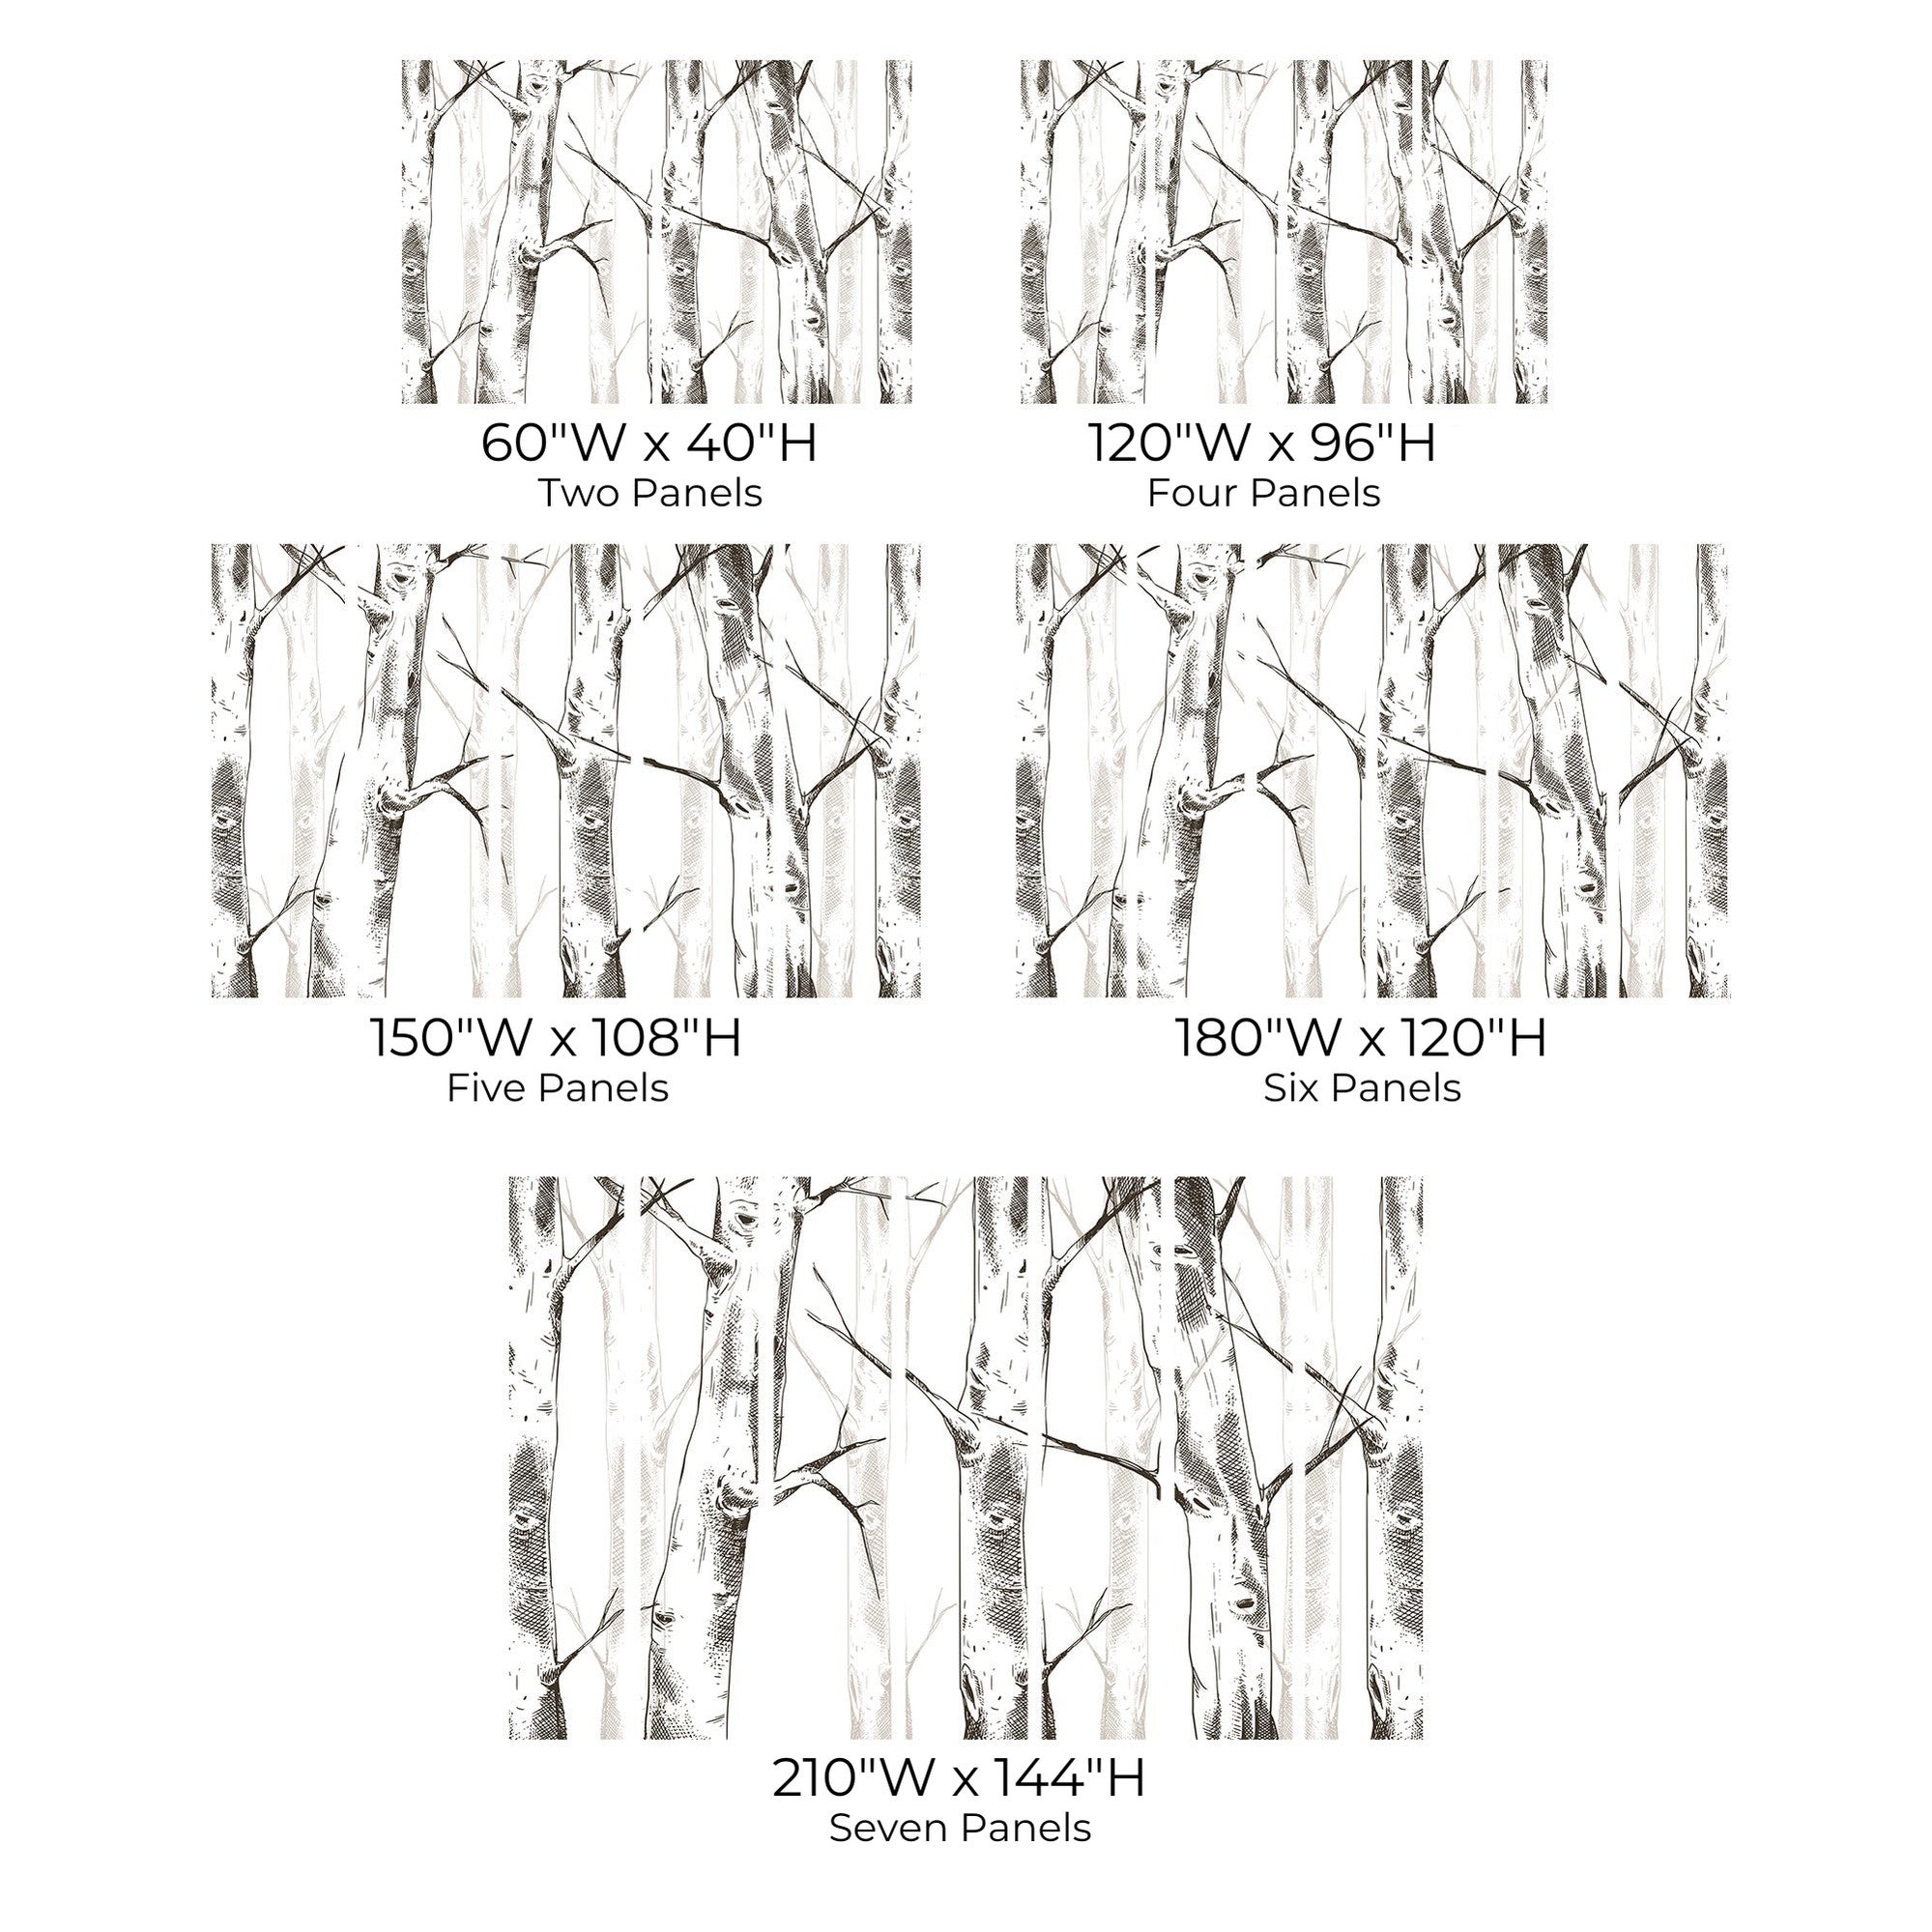 Various sizes of wall murals depicting birch trees in monochrome arranged in two to seven panel options.